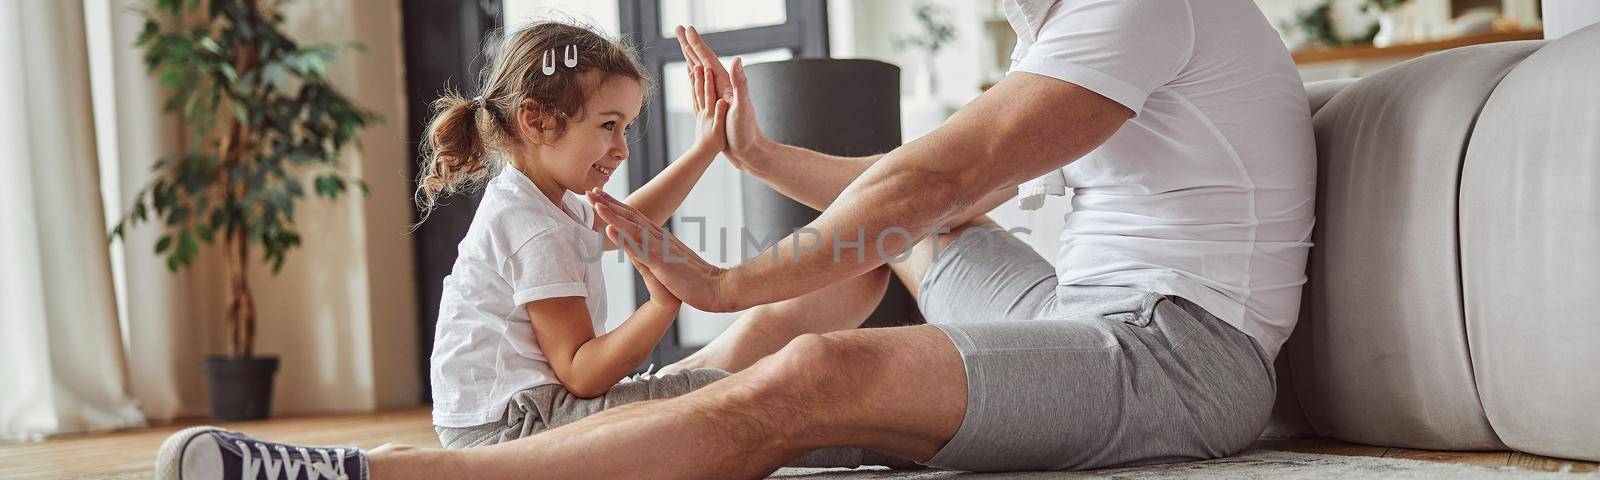 Low angle of merry man and little girl during hands-up game in cozy living room